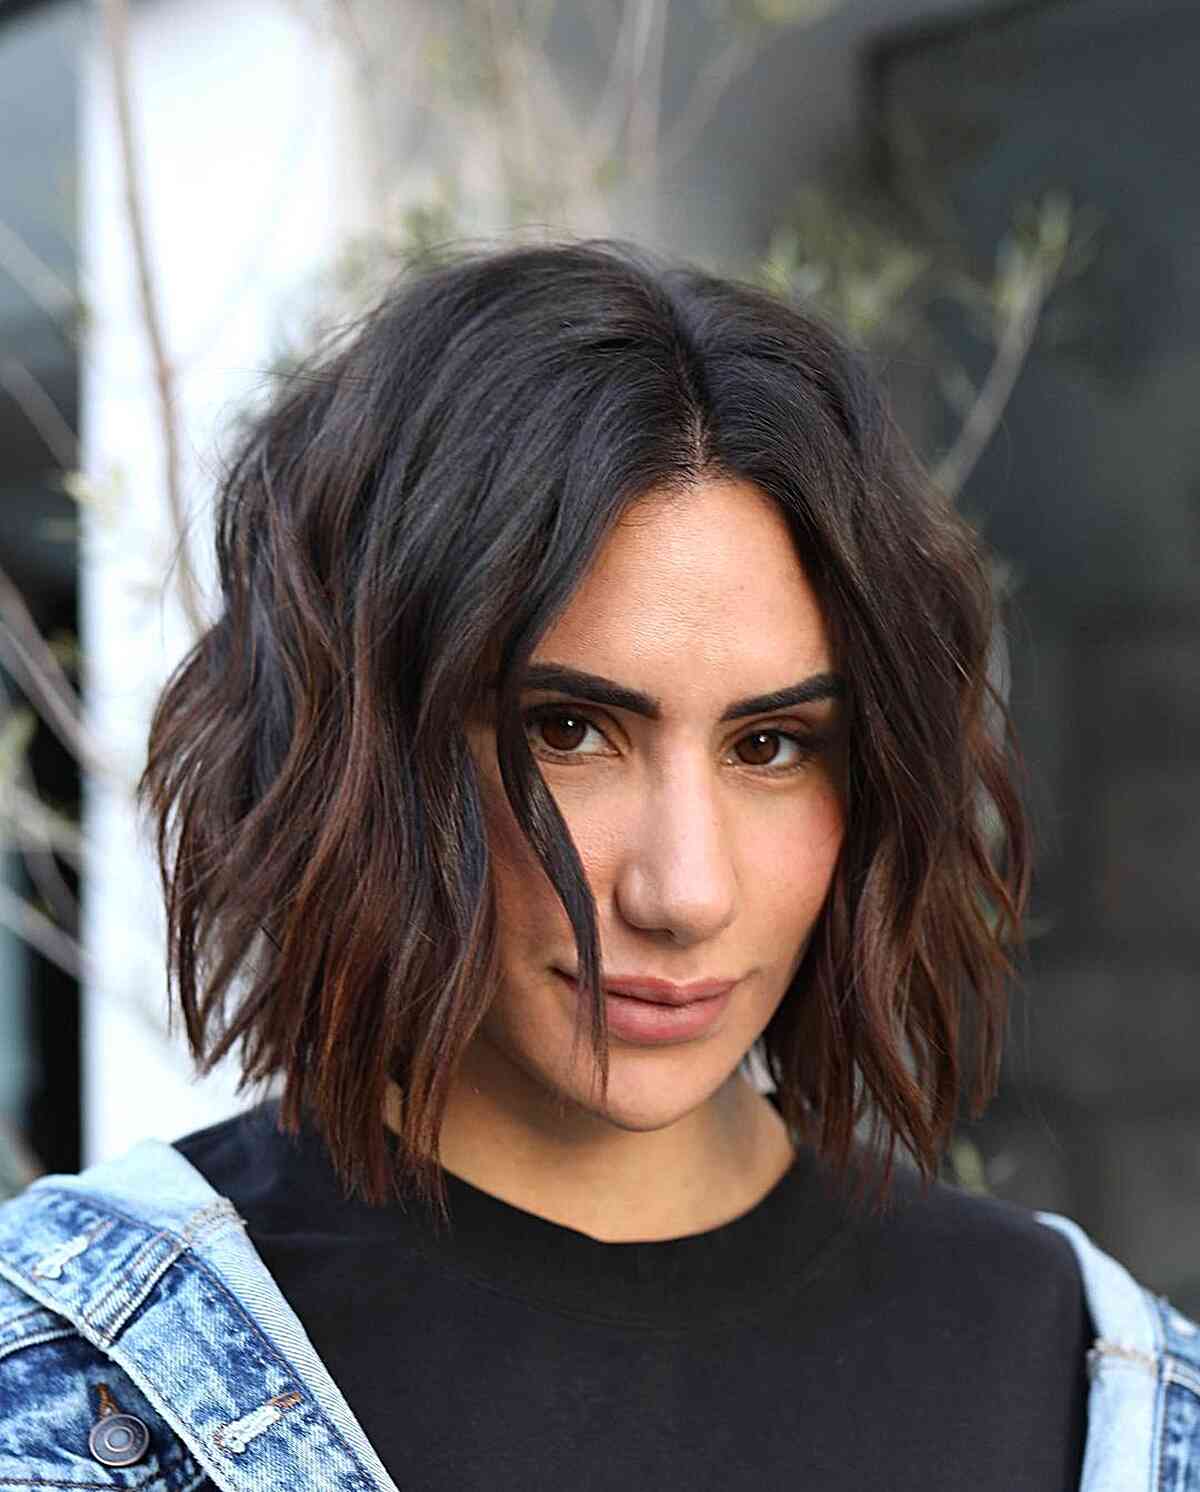 Chin-Length Textured and Choppy Bob with a Middle Part